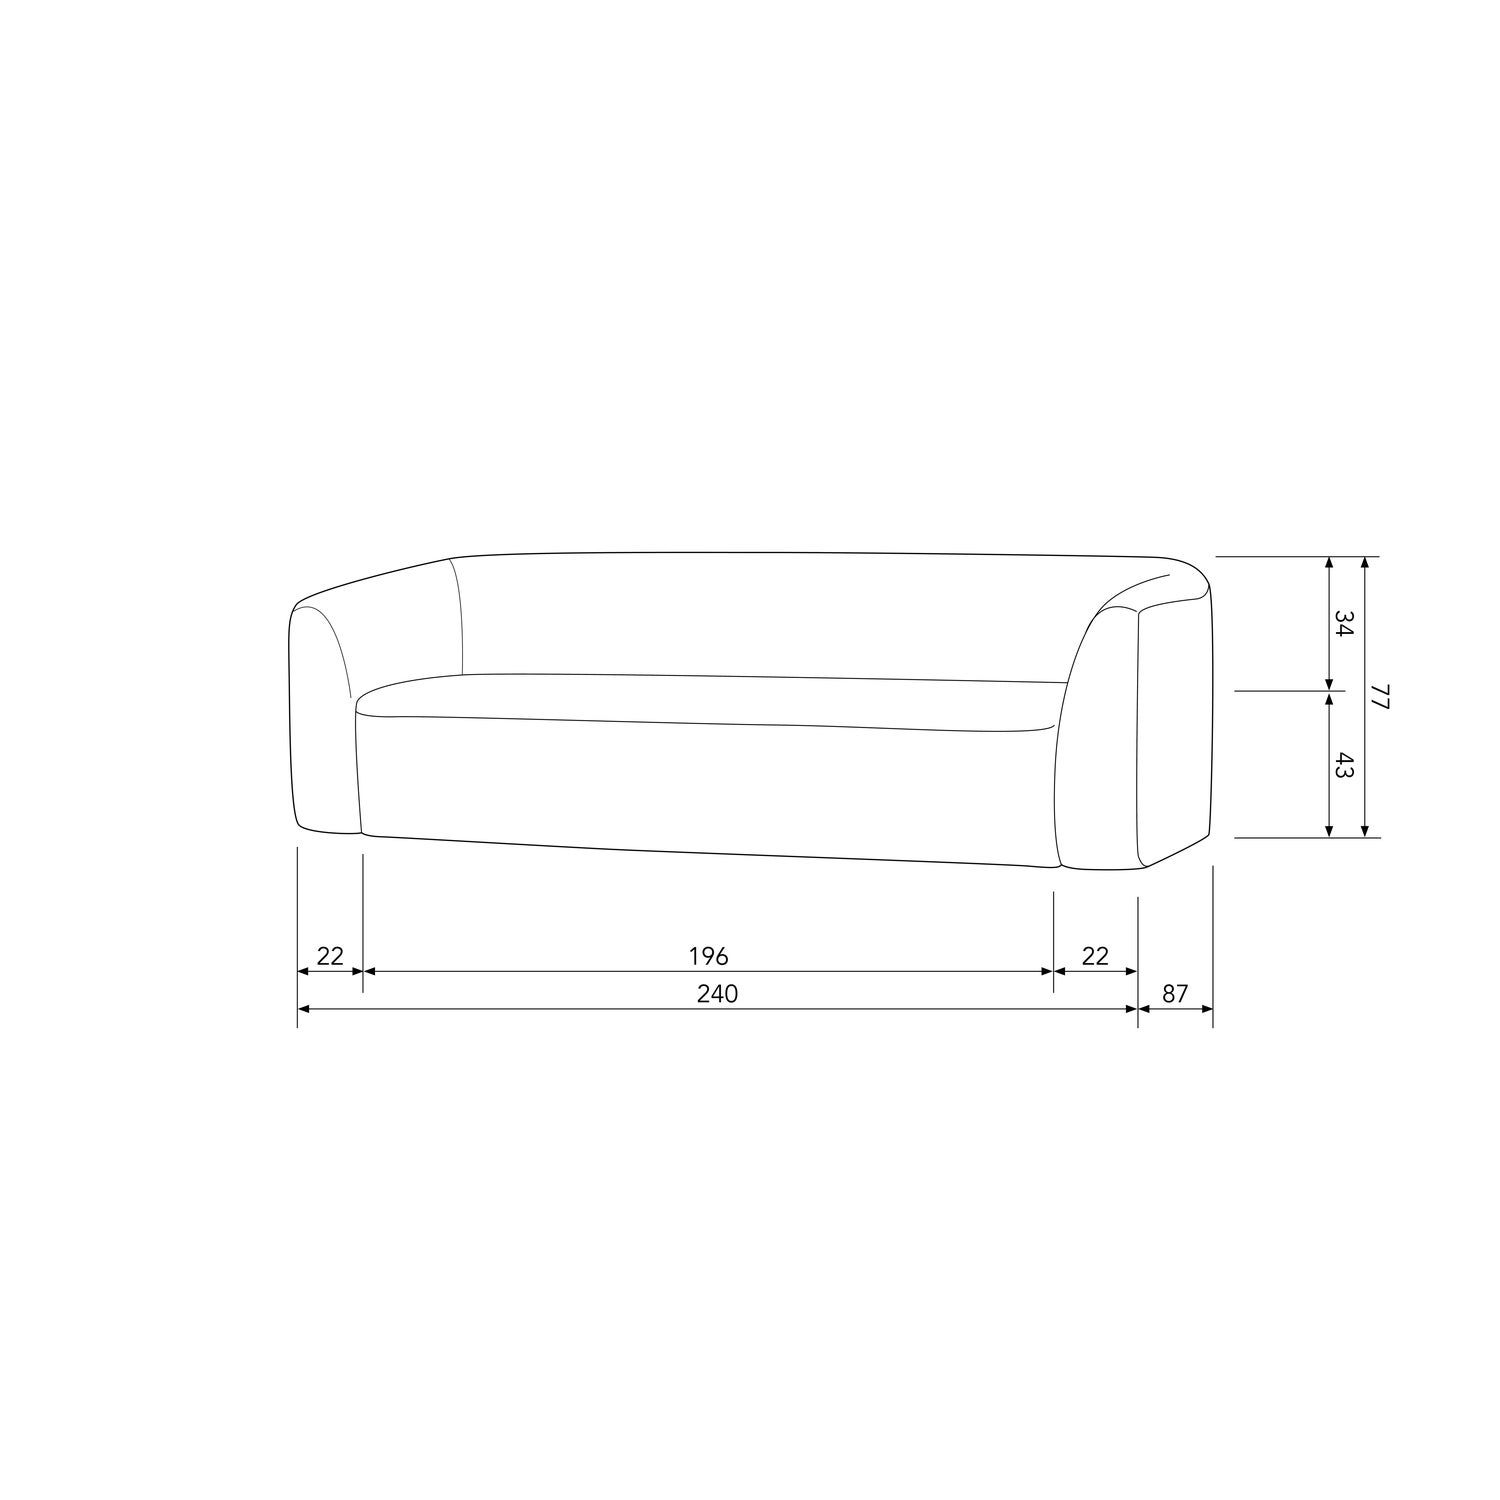 801270-Z-801270-W-801270-P-801270-N-801270-G-801270-B-50_BT_Sloping_3-seater_sofa.jpg?auto=webp&format=png&width=2000&height=2000